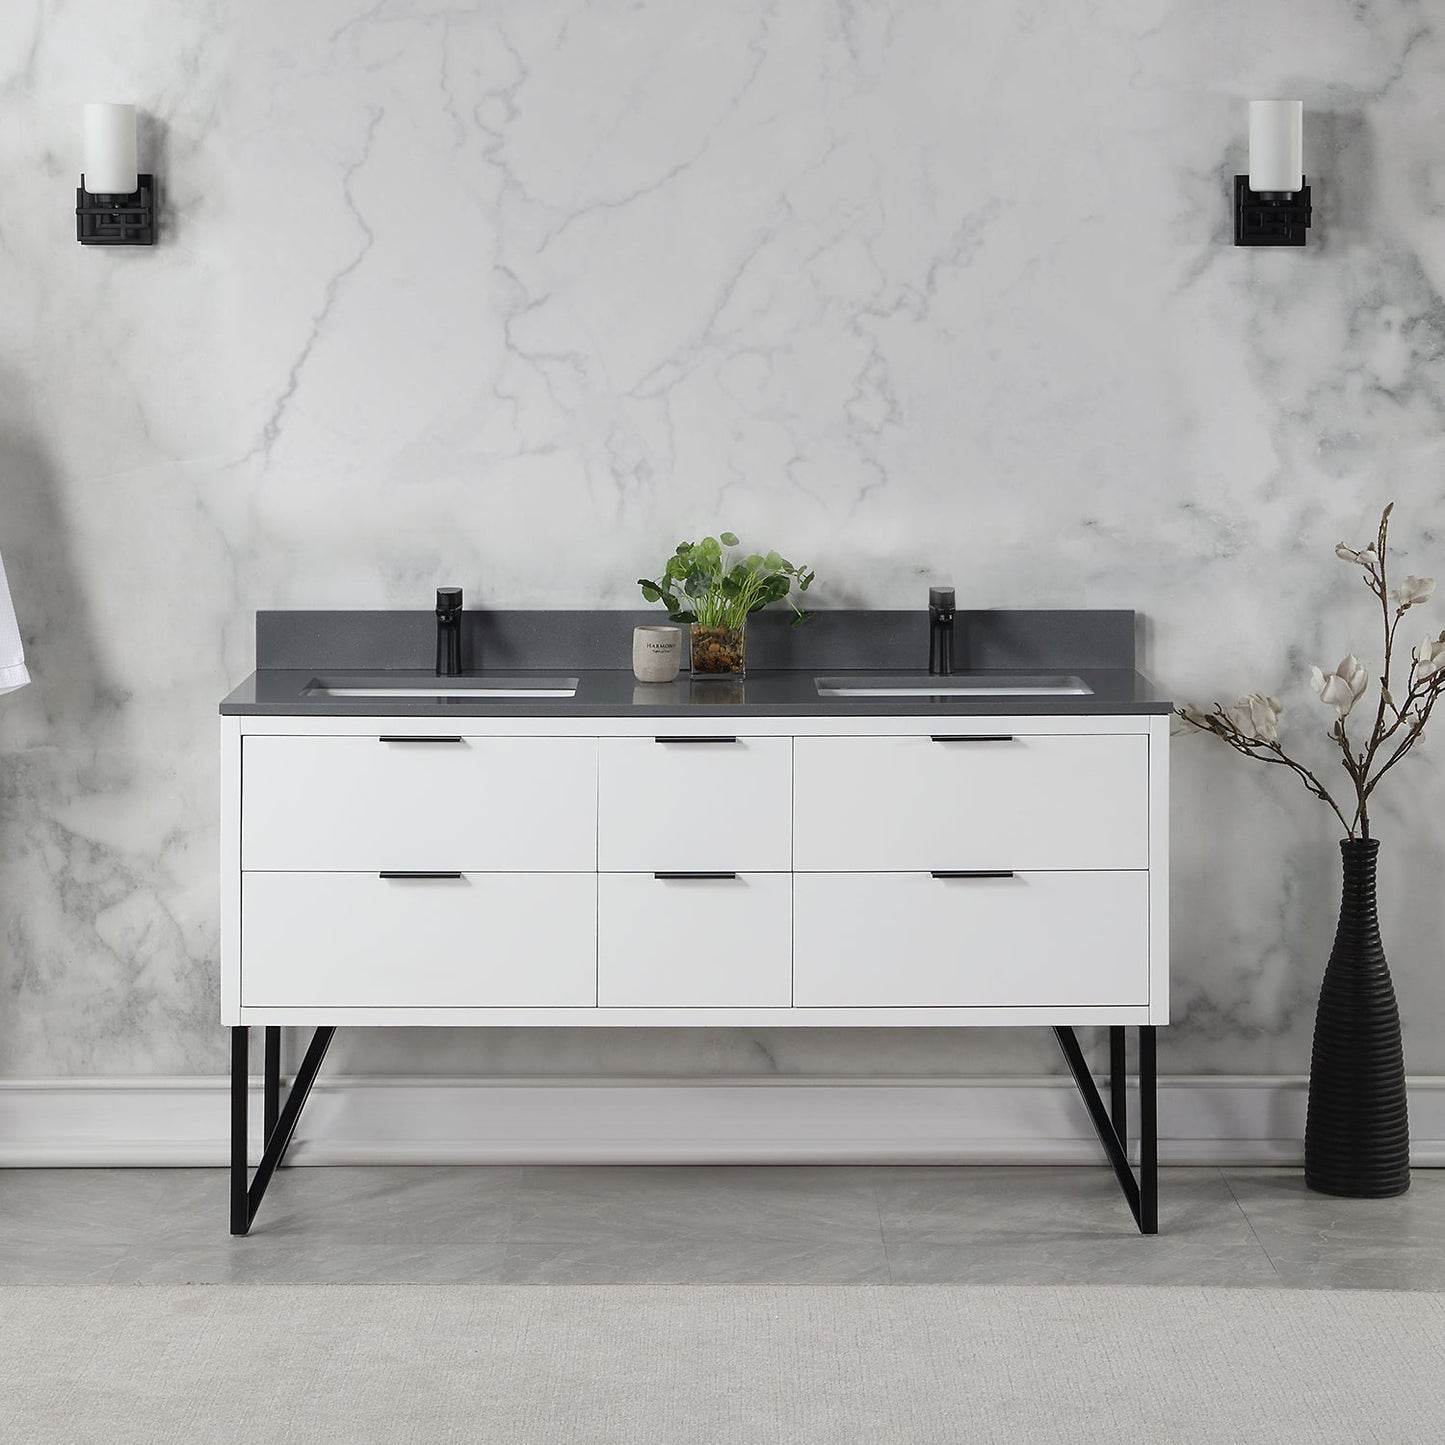 Helios 60" Double Bathroom Vanity in White with Concrete Gray Composite Stone Countertop without Mirror